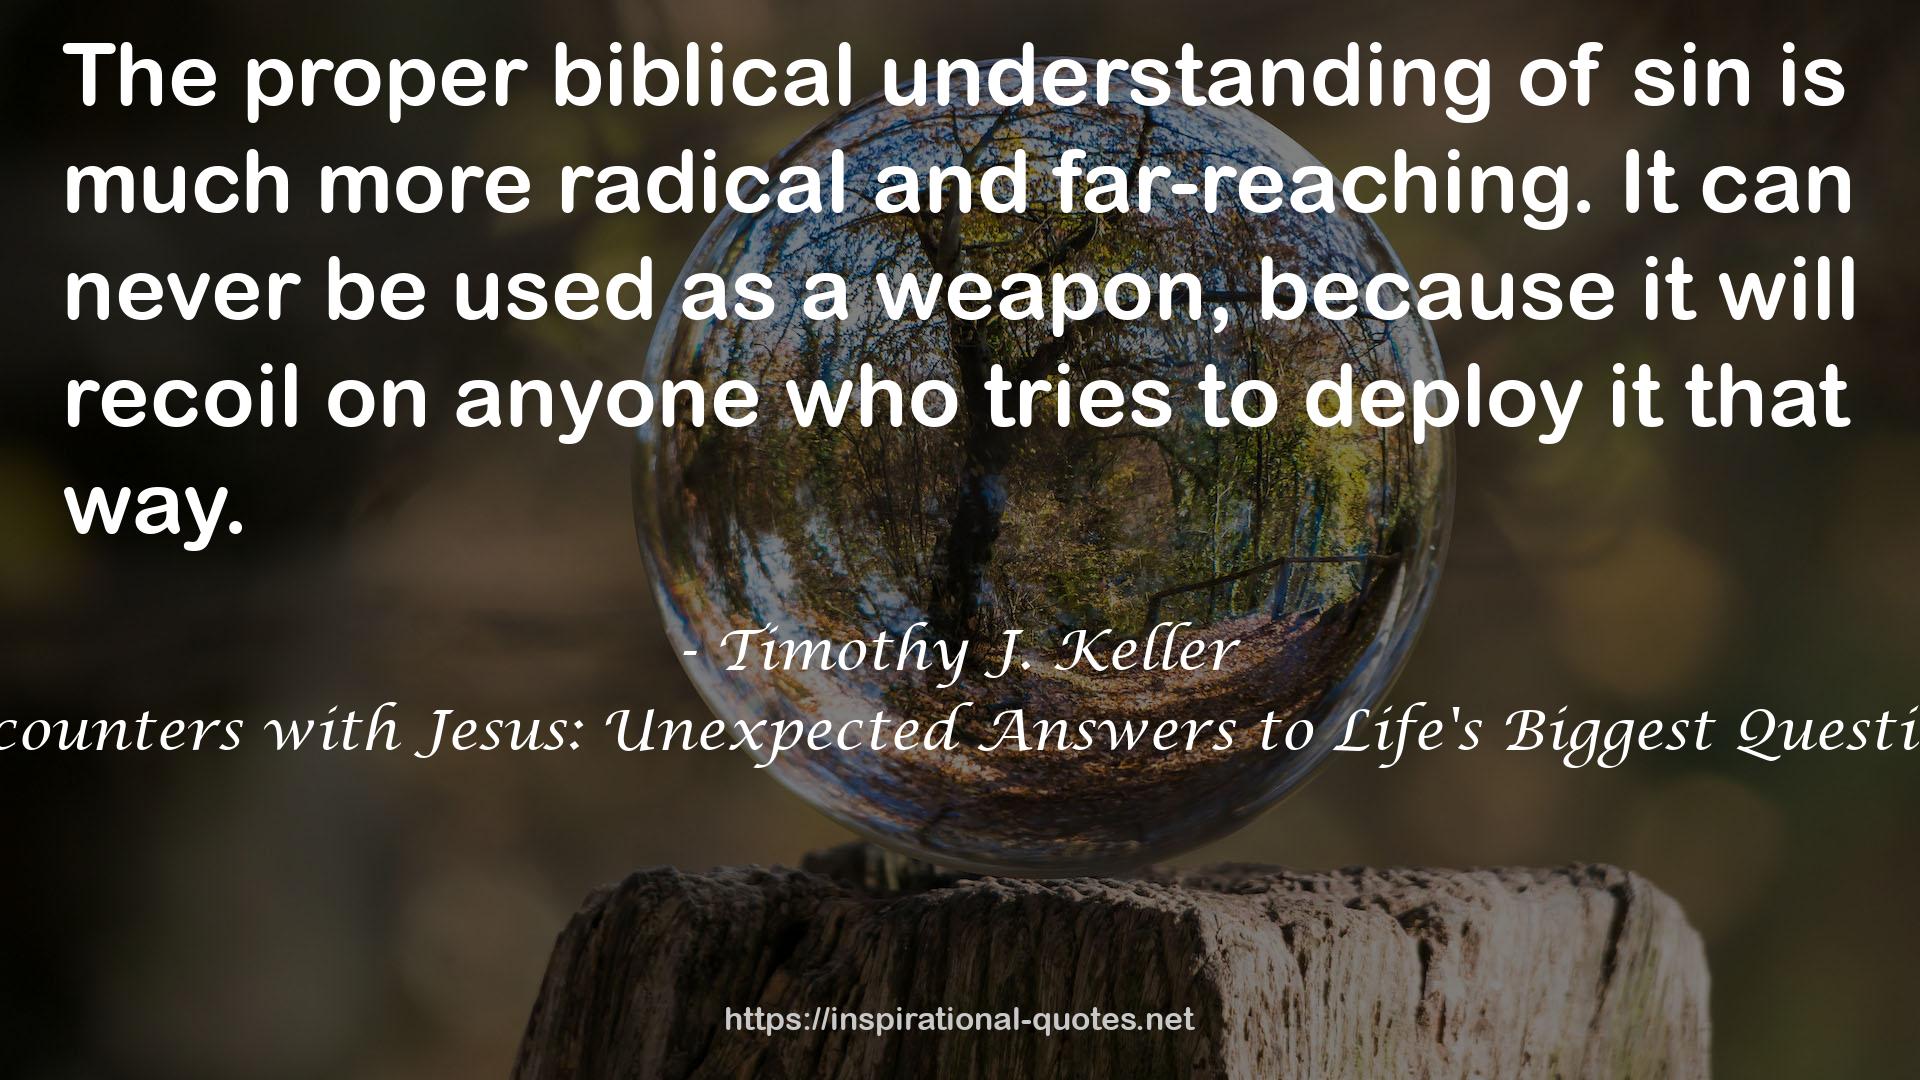 Encounters with Jesus: Unexpected Answers to Life's Biggest Questions QUOTES